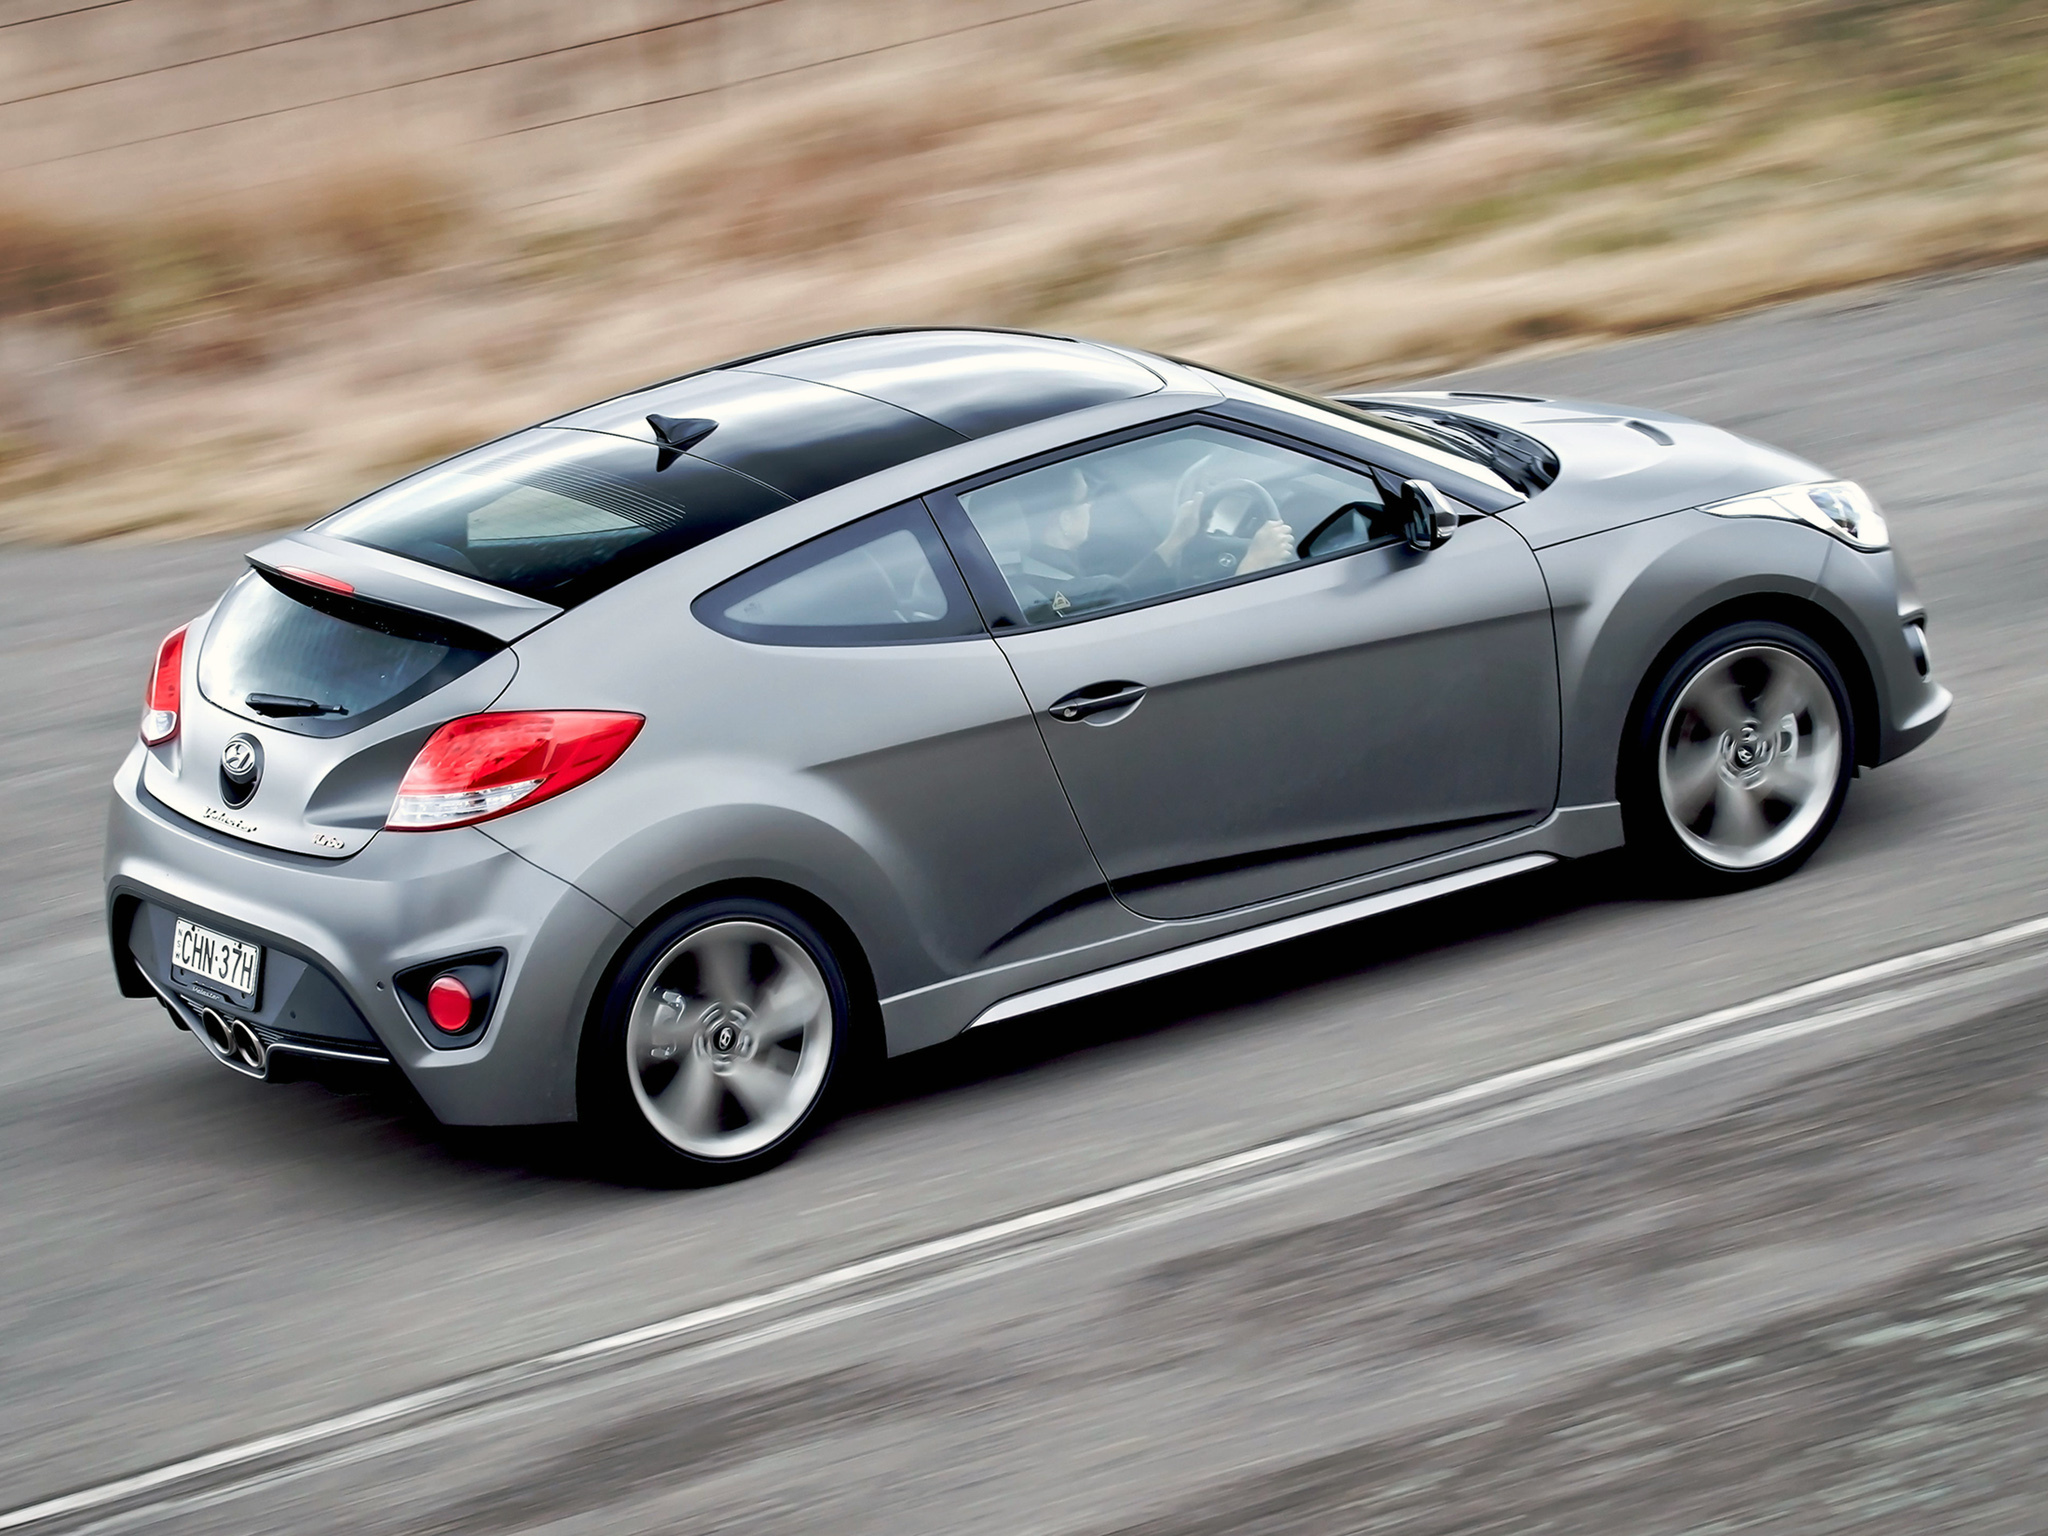 hyundai, cars, side view, silver, silvery, turbo, veloster